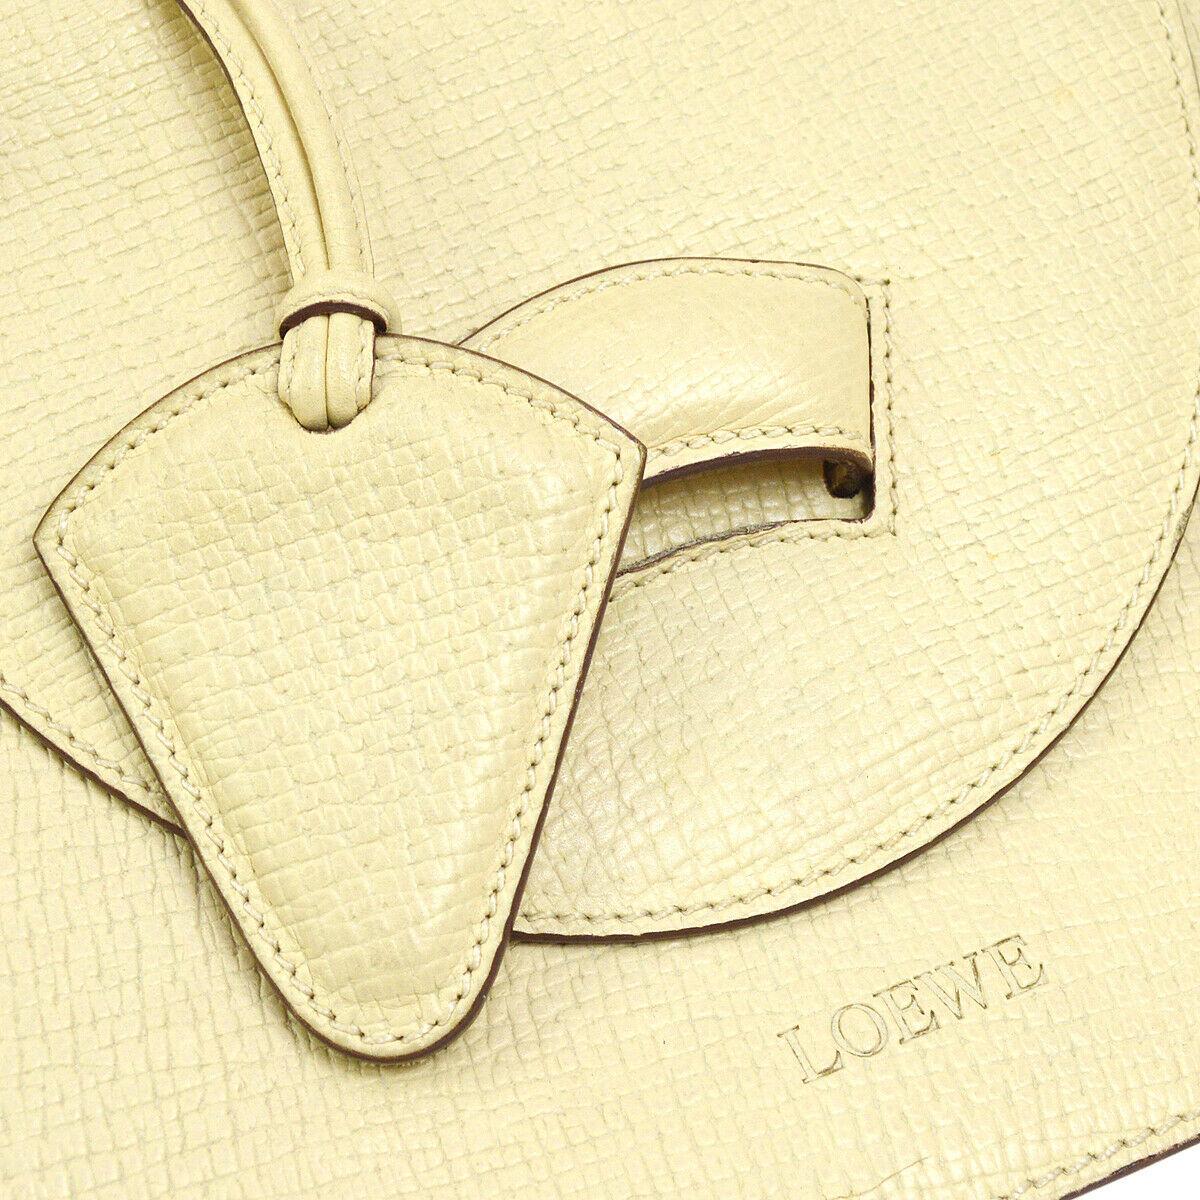 Loewe Cream Nude Leather Small Top Handle Kelly Style Evening Satchel Shoulder Flap Bag

Leather
Slip flap closure
Woven lining
Made in Italy
Handle drop 3.5